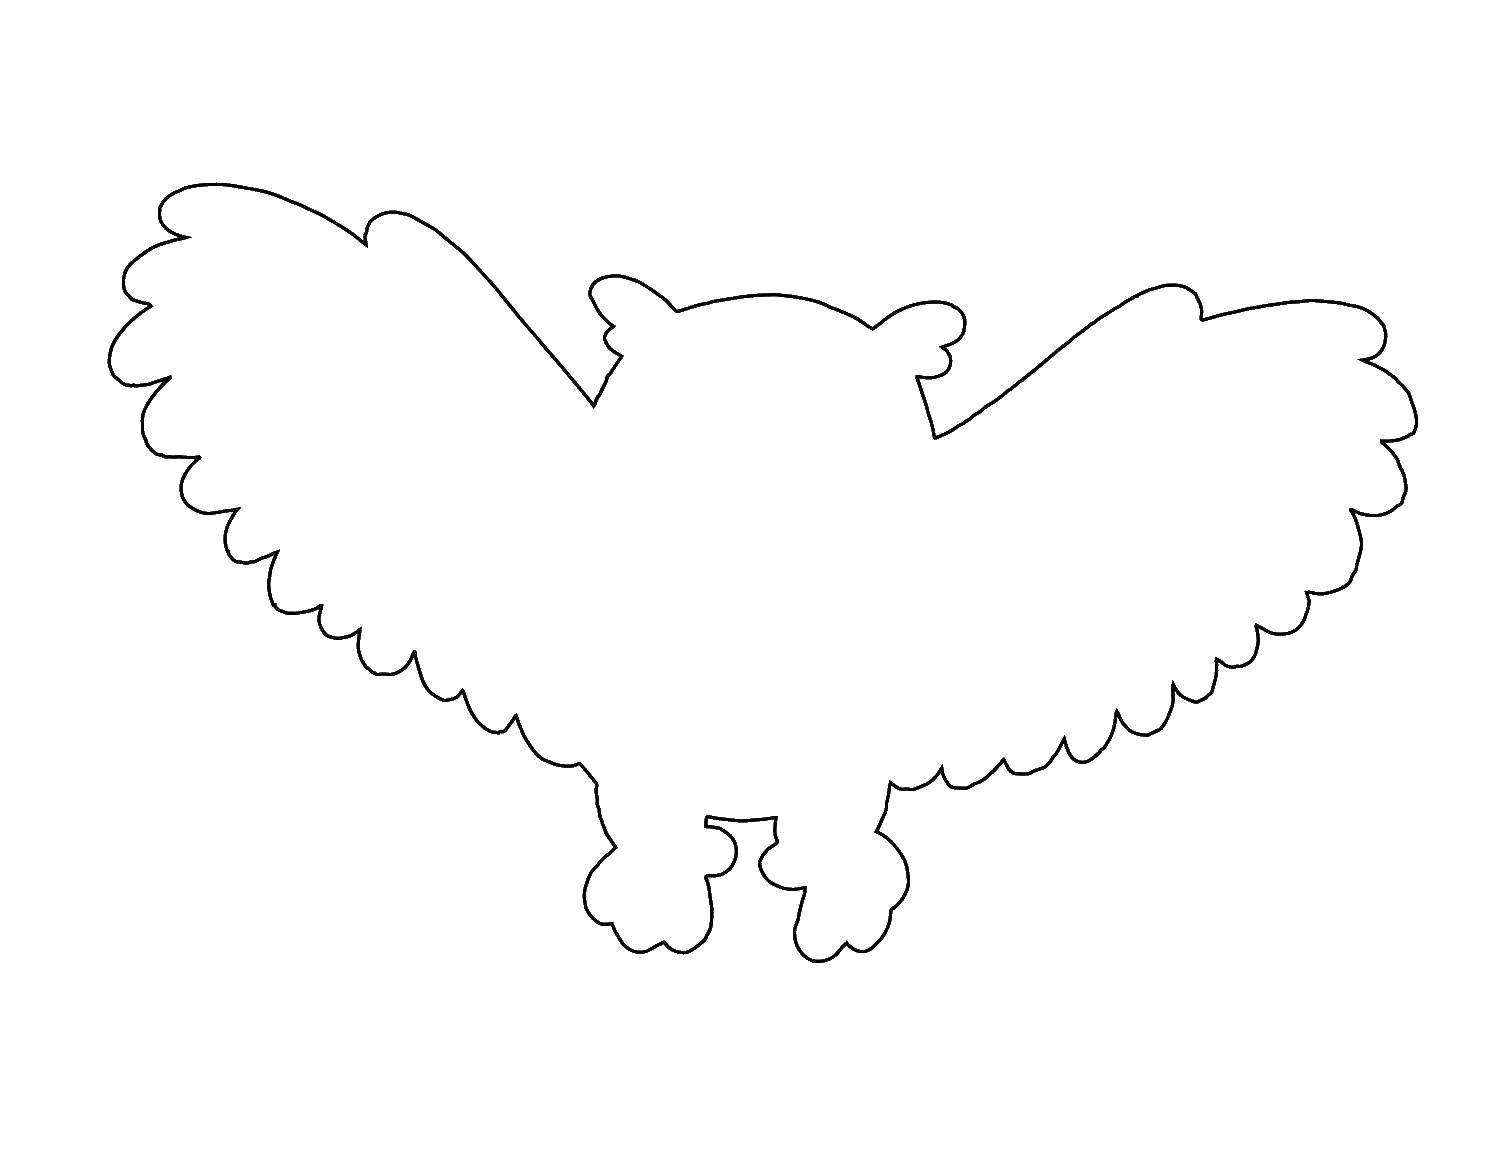 Coloring Outline owl. Category The contours for cutting out the birds. Tags:  Birds, owl.